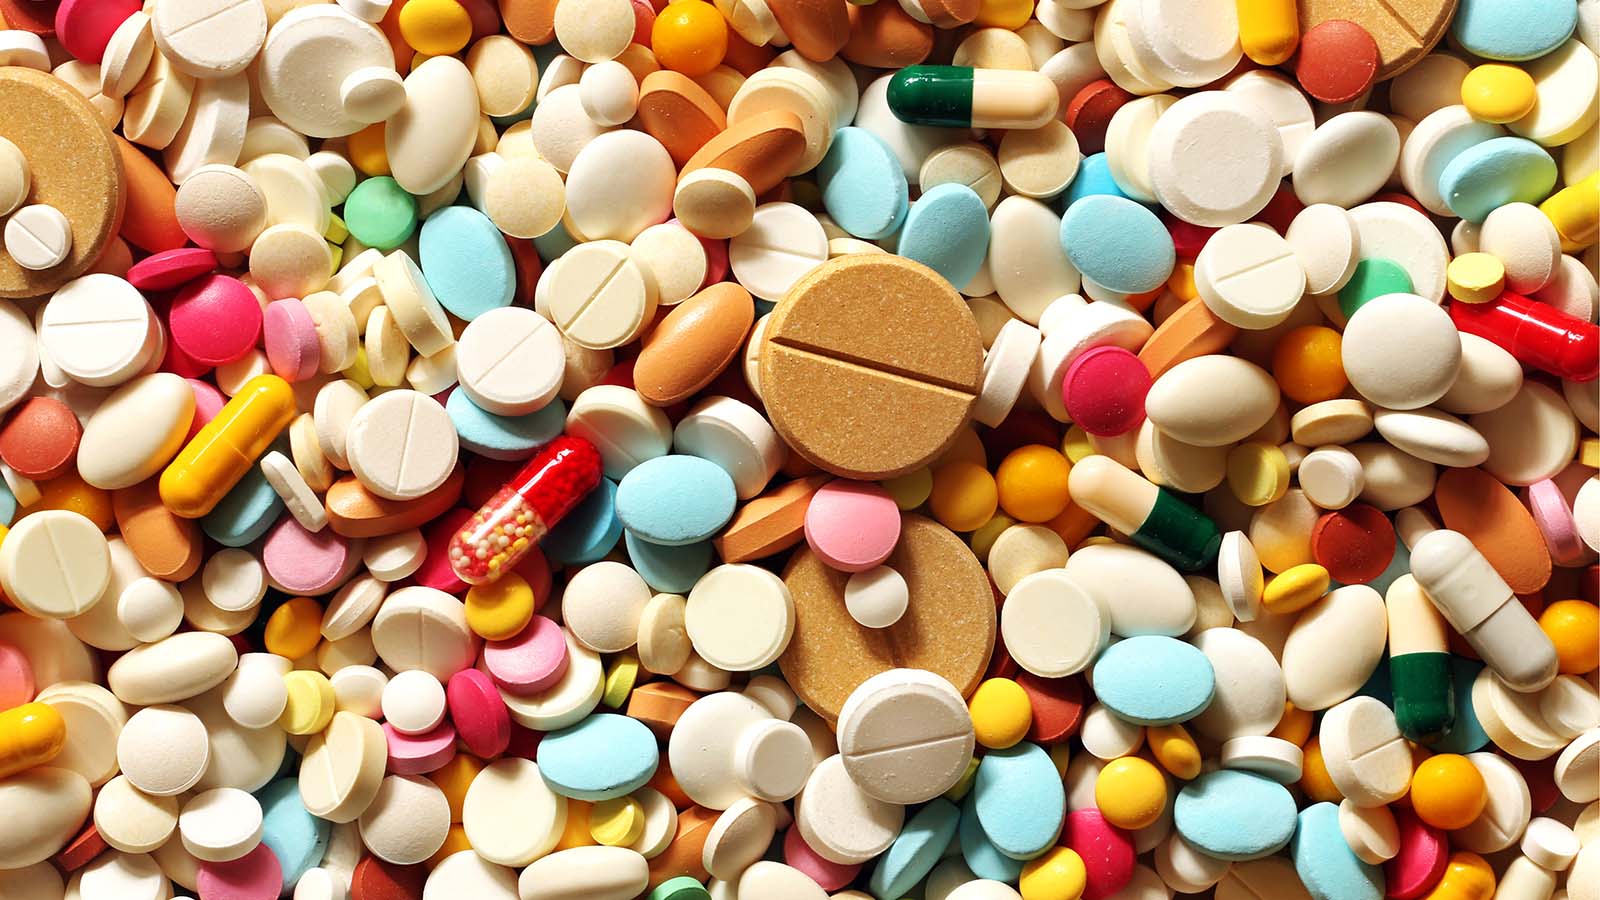 A pile of brightly colored pills in varying sizes and shapes representing TMBR stock.